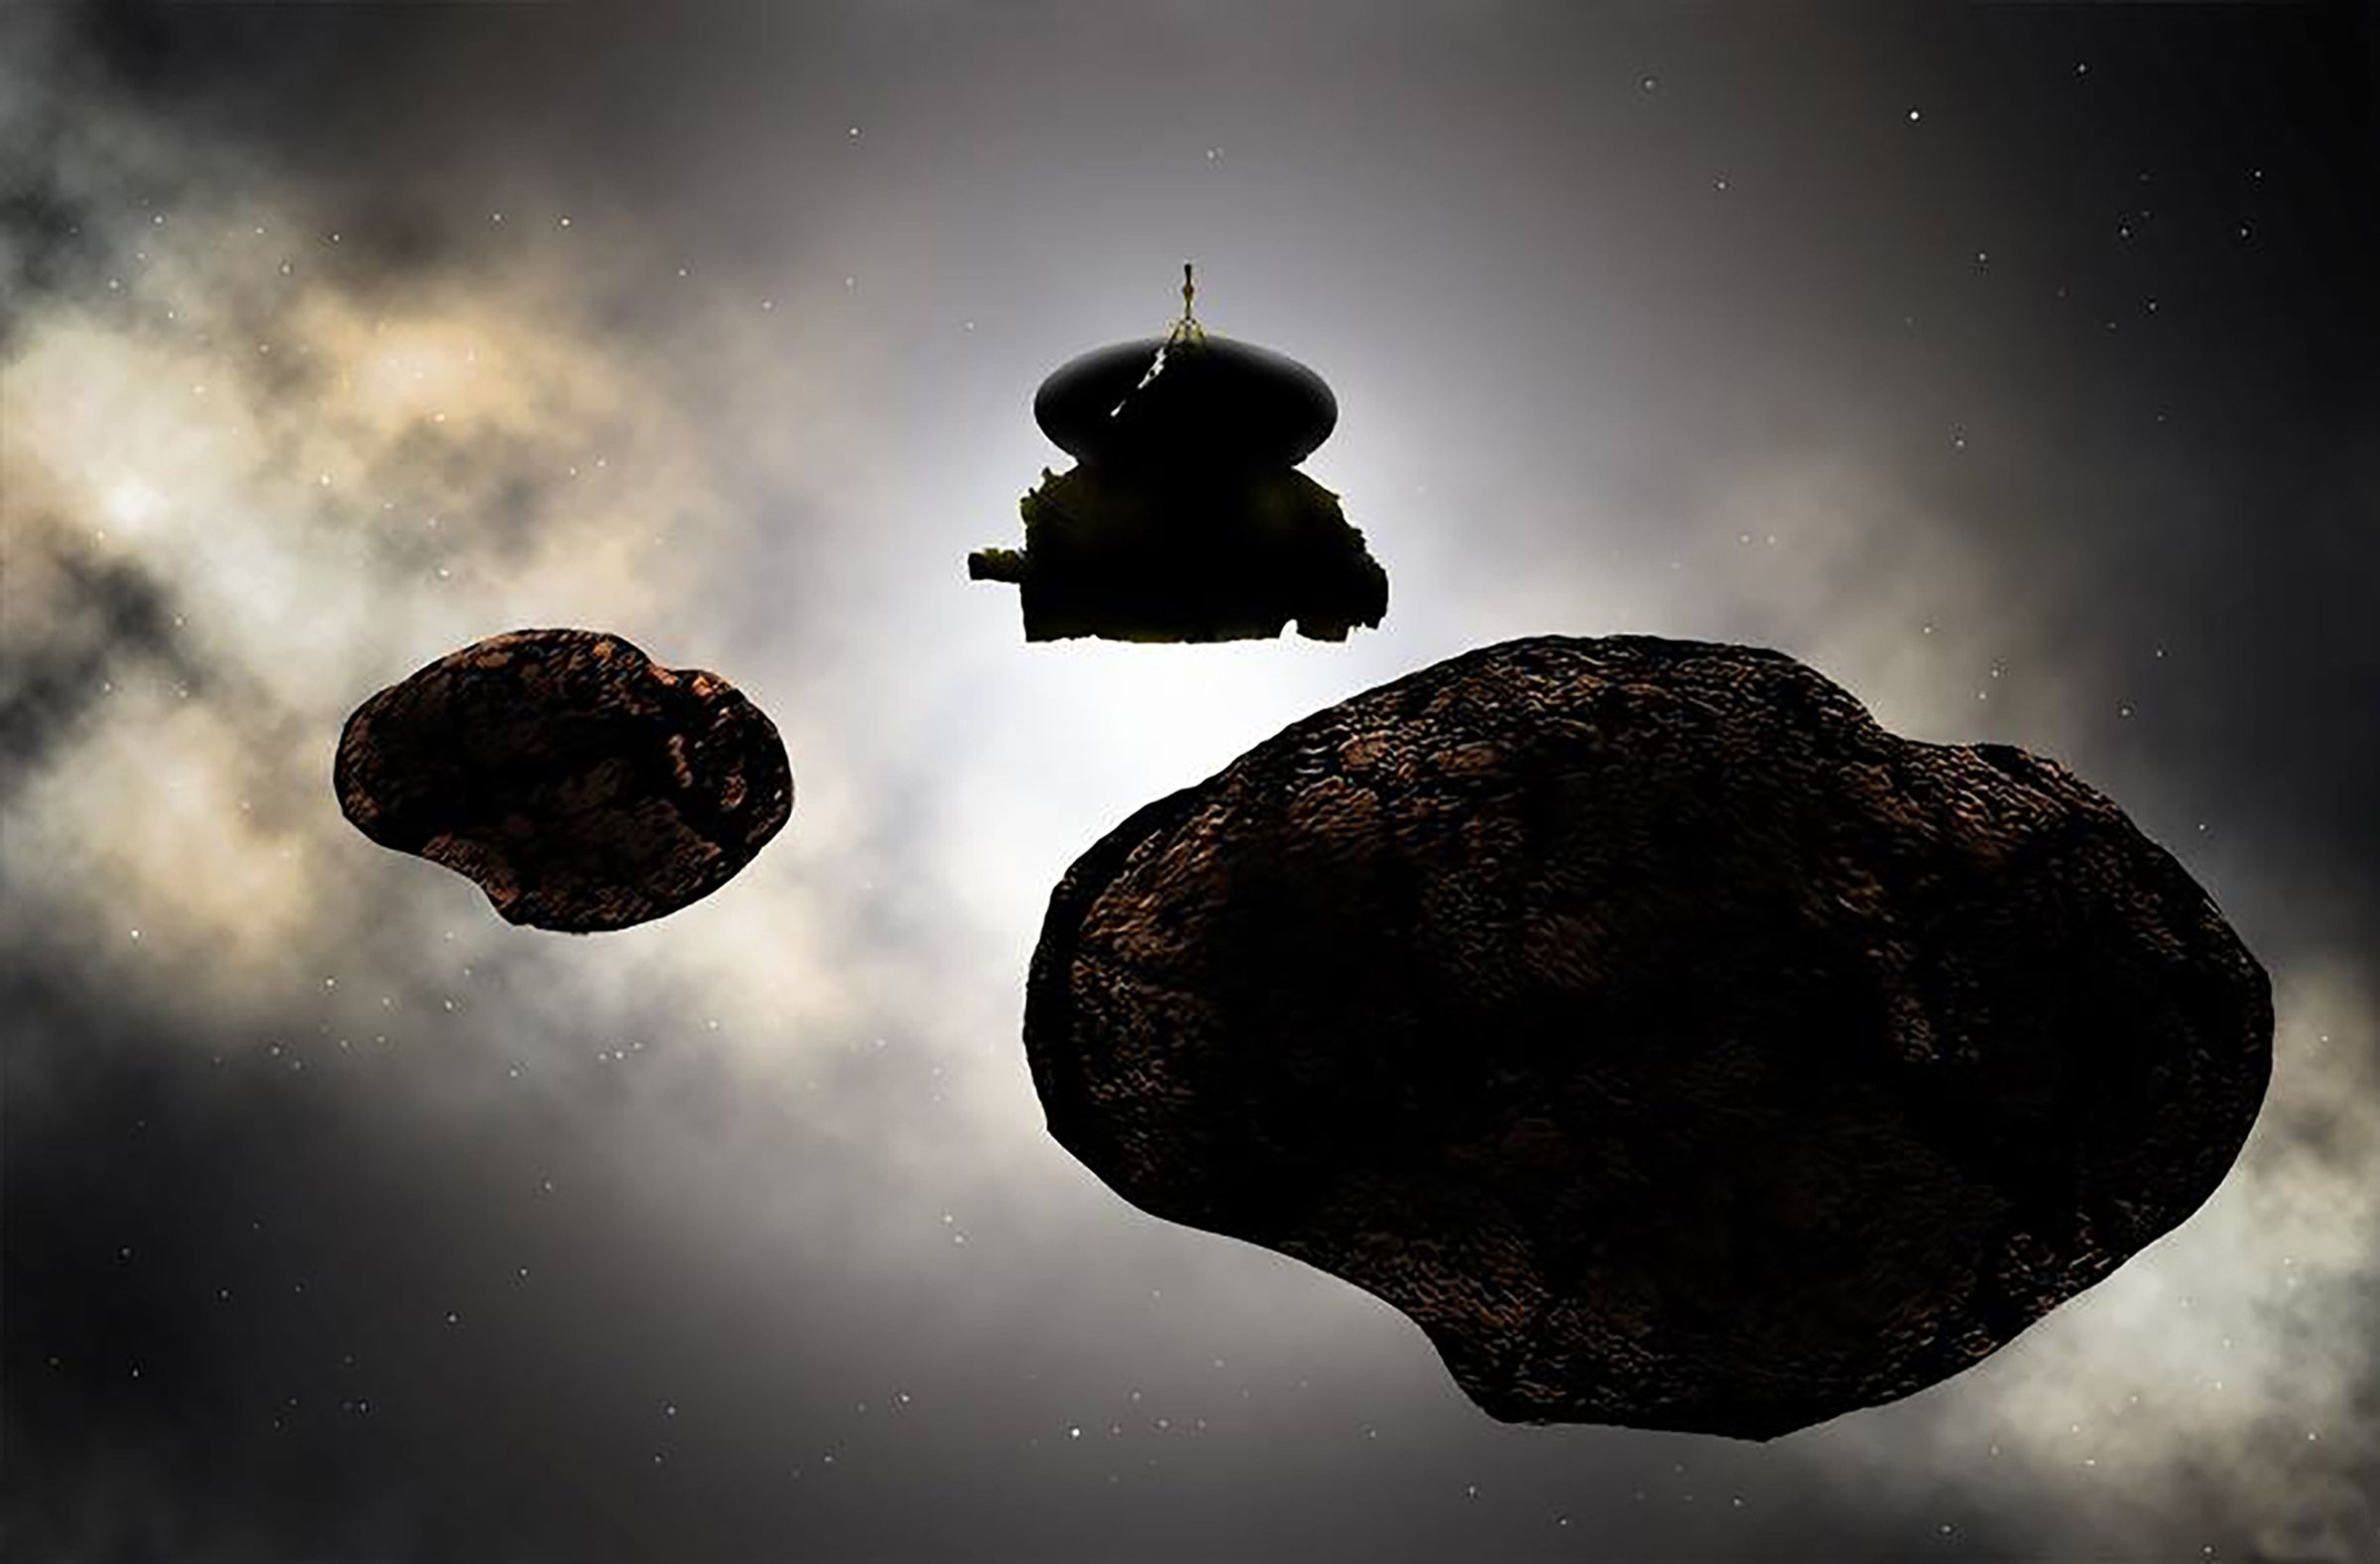 An artistic rendering of New Horizons meeting up with MU69, which may be two objects instead of one.